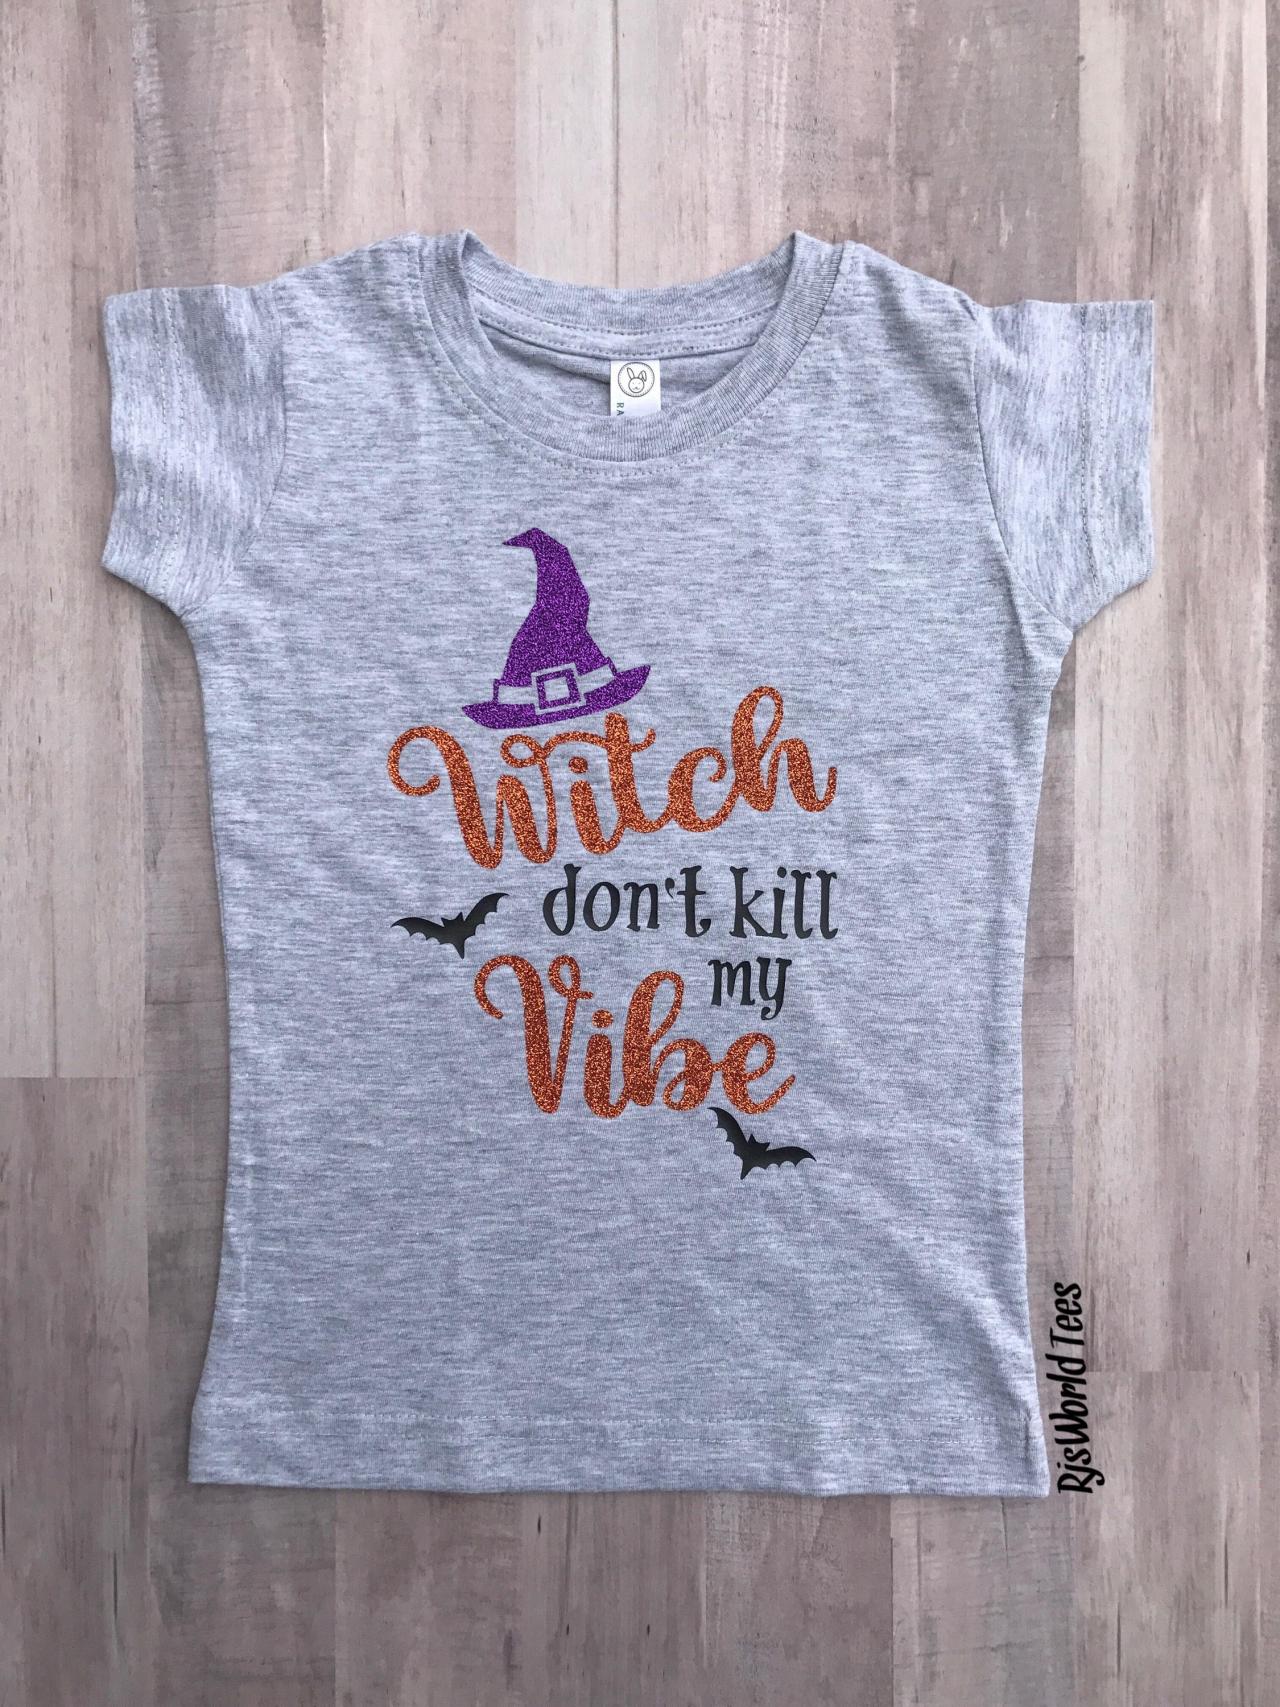 Witch don't kill my Vibe tee, Toddler Girls Halloween Tee, Girls Halloween Witch Tee